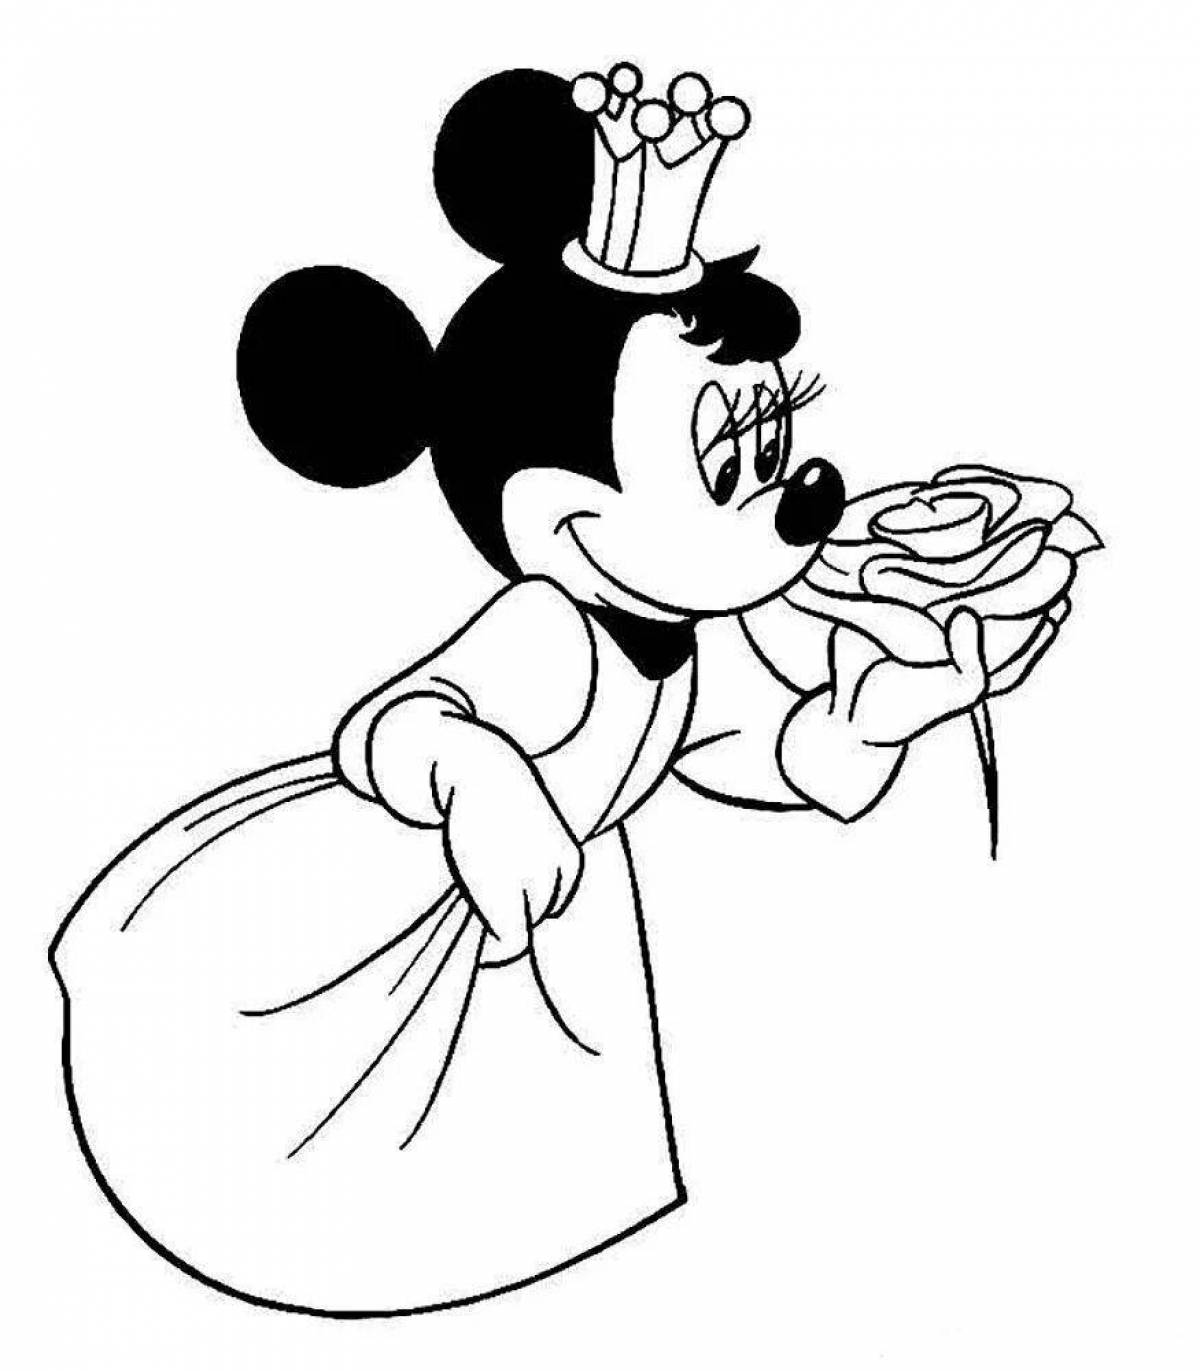 Minnie mouse amazing coloring page